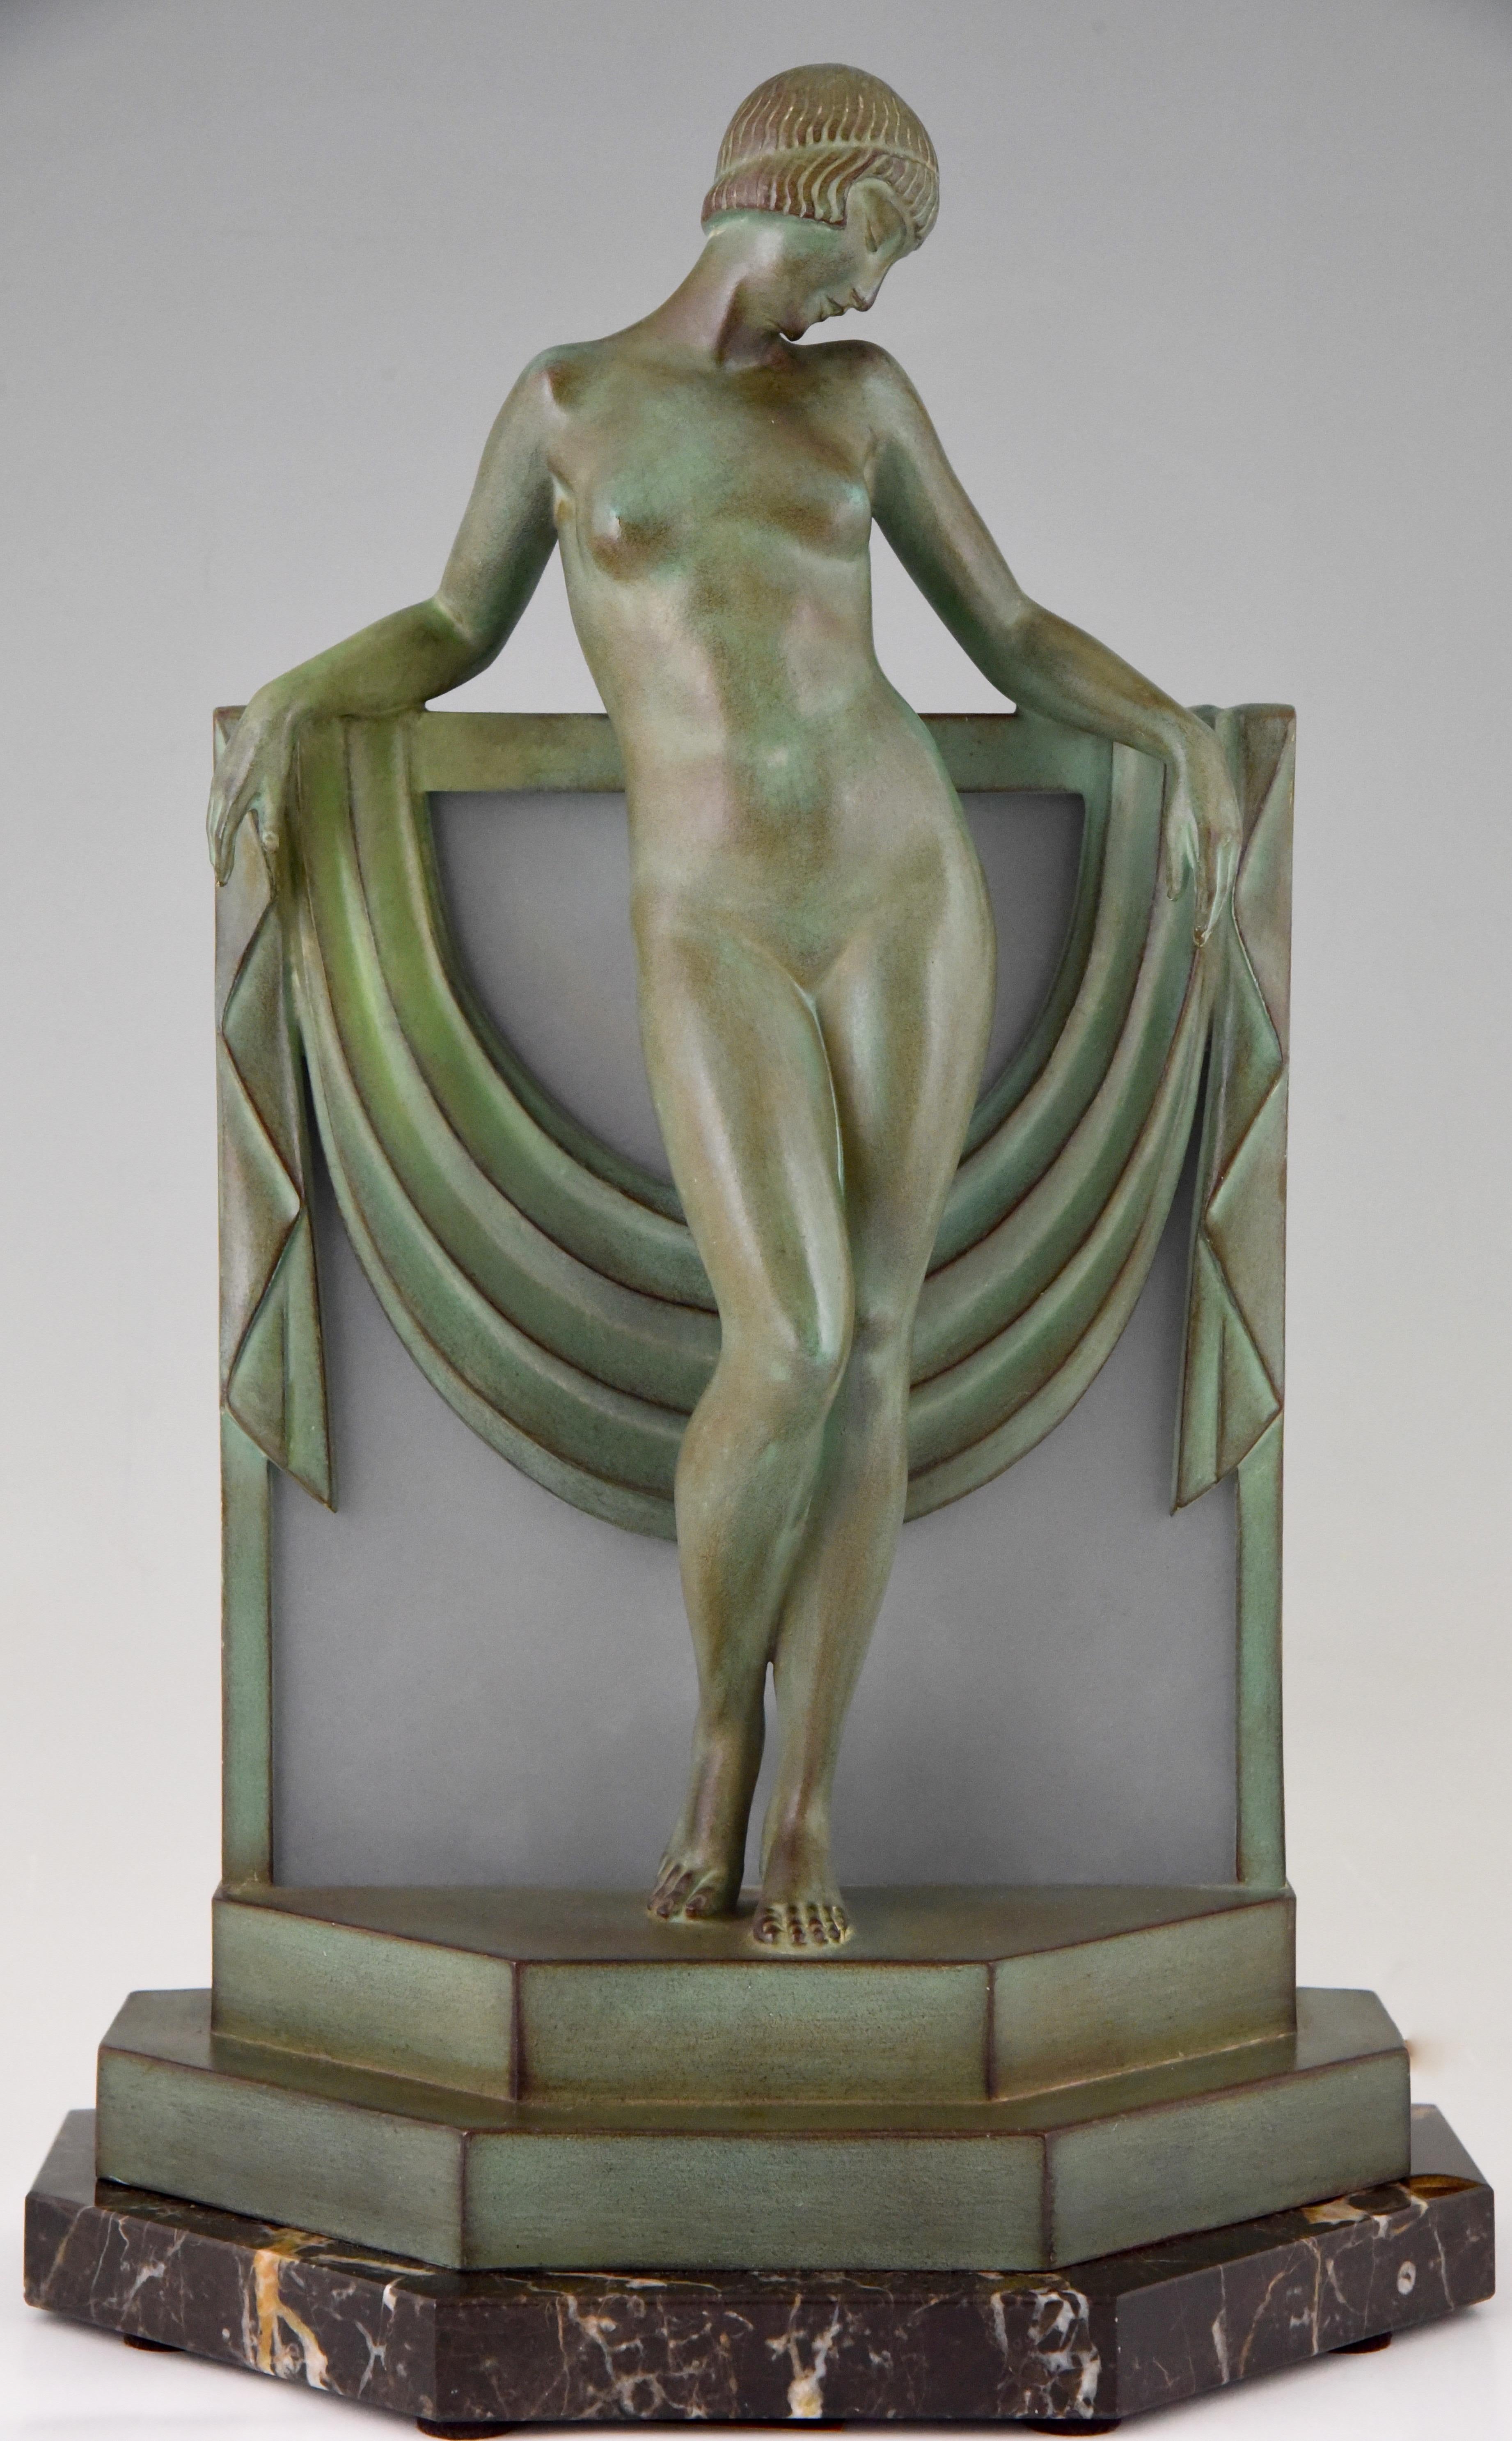 Sérénité, Art Deco lamp sculpture nude with scarf by Fayral, pseudonym of Pierre Le Faguays.
This lamp was cast at the Max Le Verrier foundry. 
The sculpture is in art metal with a beautiful green patina and stands on a marble base with frosted